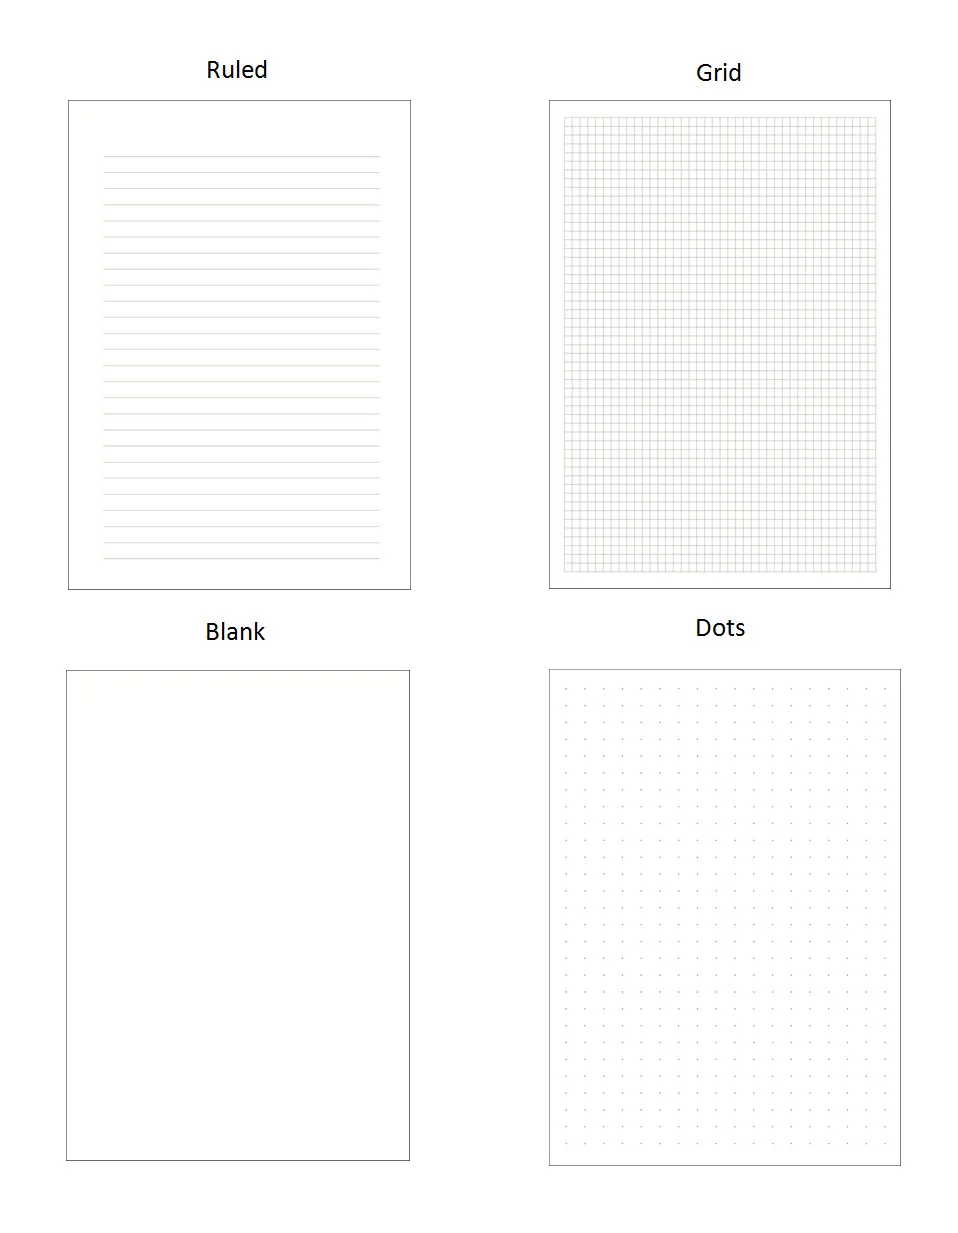 A5 A6 A7 Blank Transparent Plastic PP Cover Loose Leaf Ring Spiral Notebook With Filler Paper